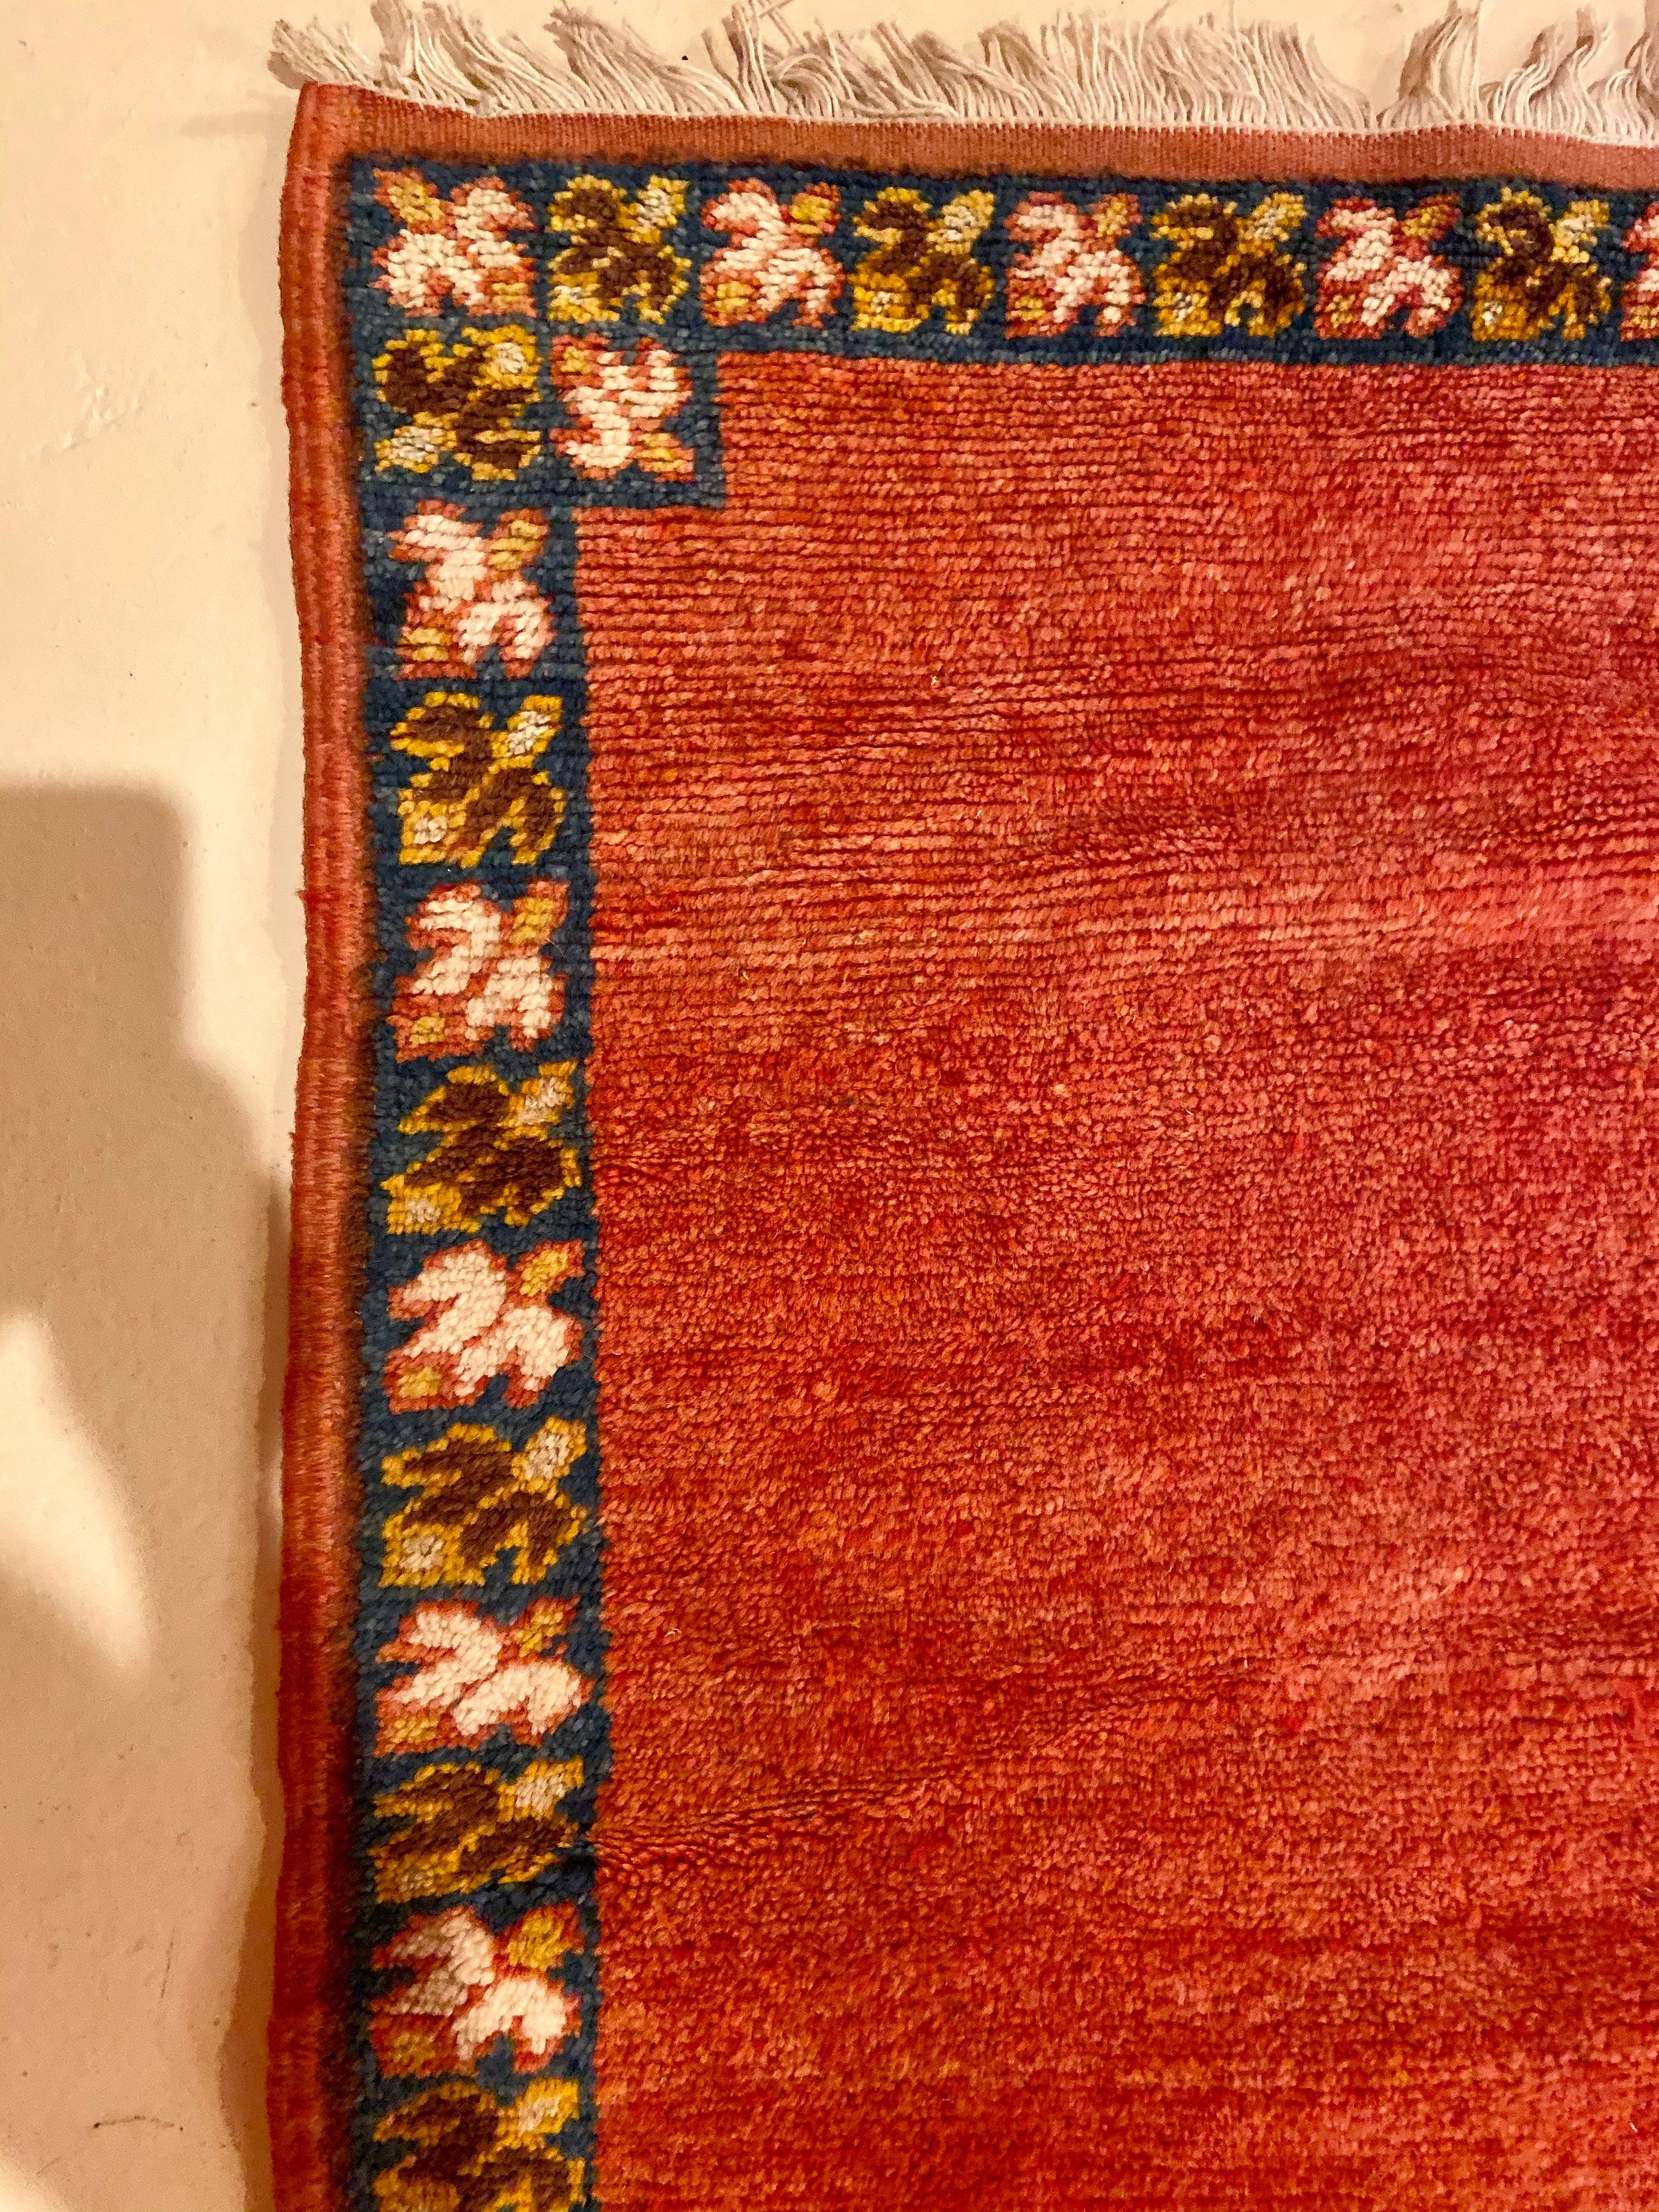 Contemporary Moroccan Tribal Handwoven Rug or Carpet Wool with Blue Diamond on Red Background